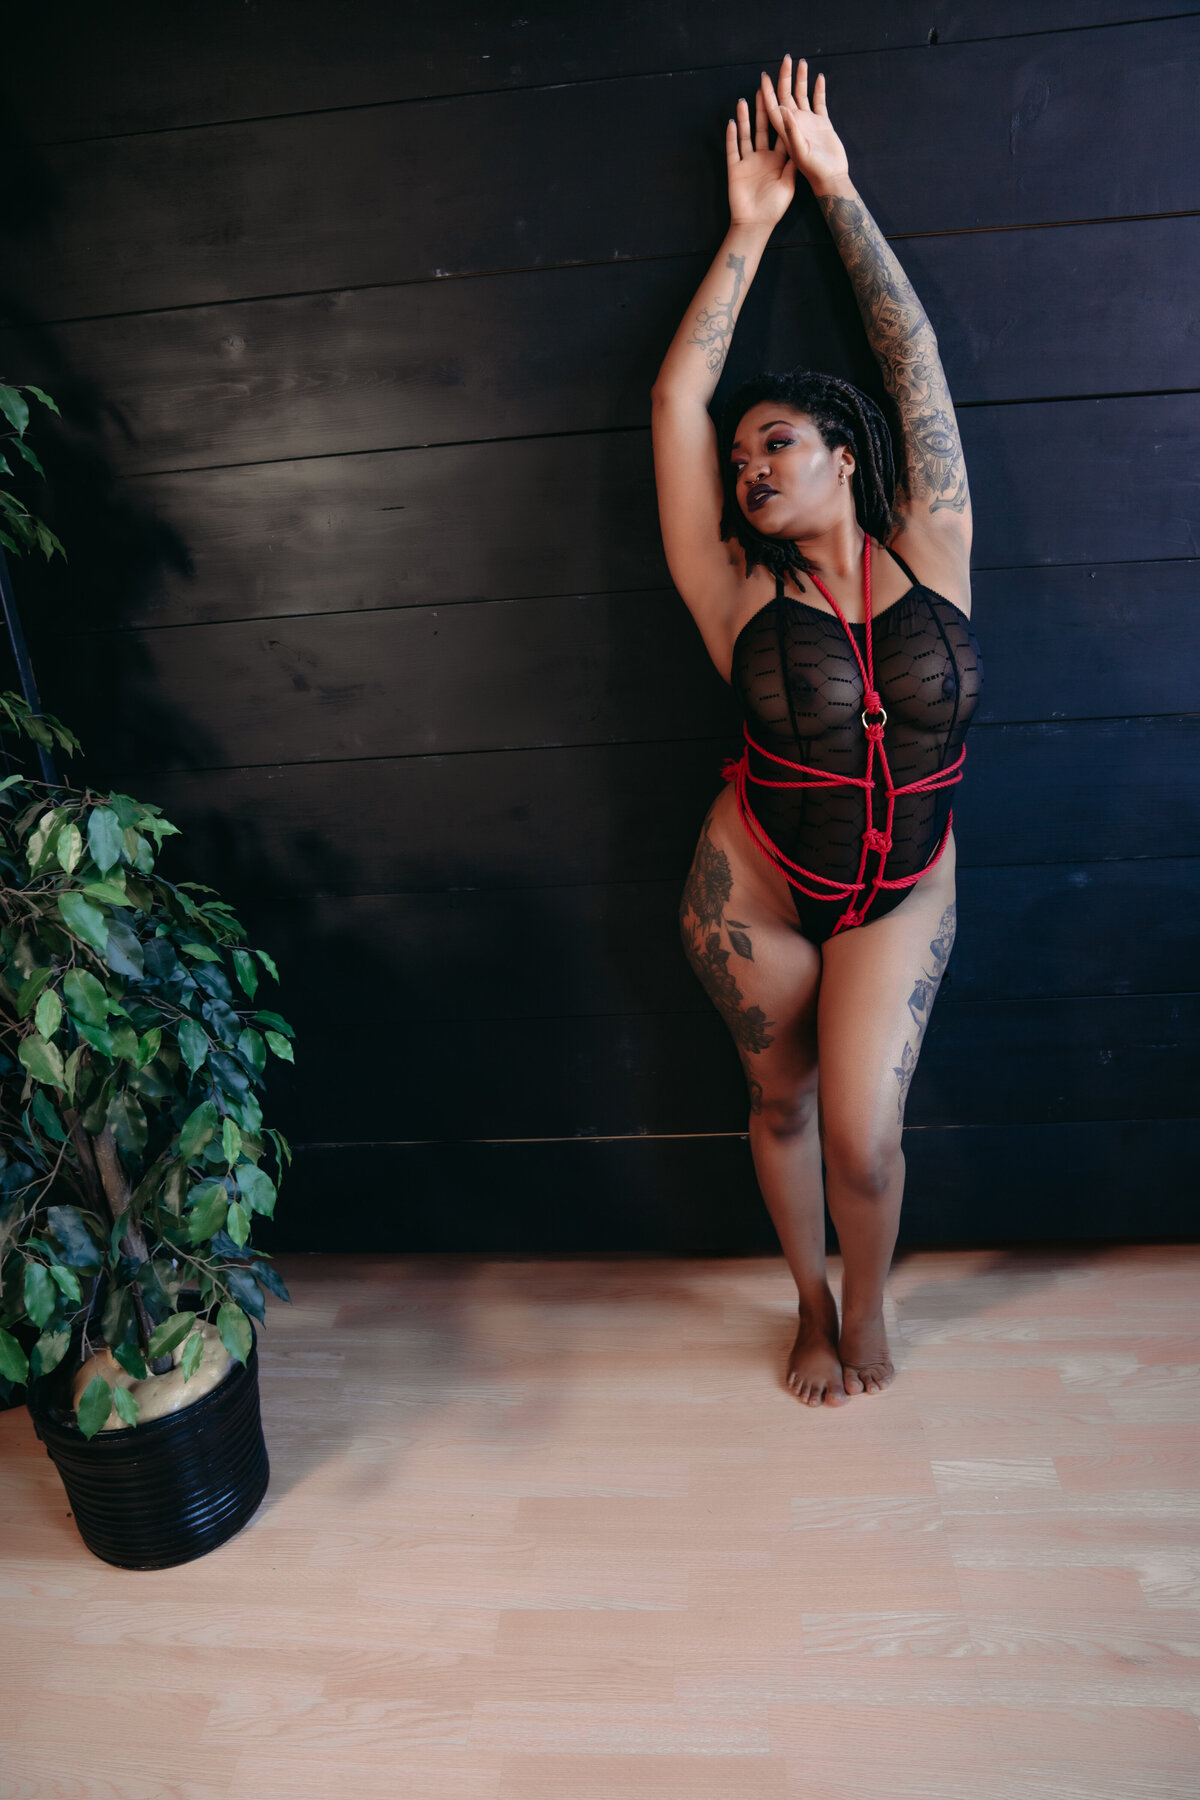 A stunning black woman  wearing black lingerie and shibari inspired red rope ties around her